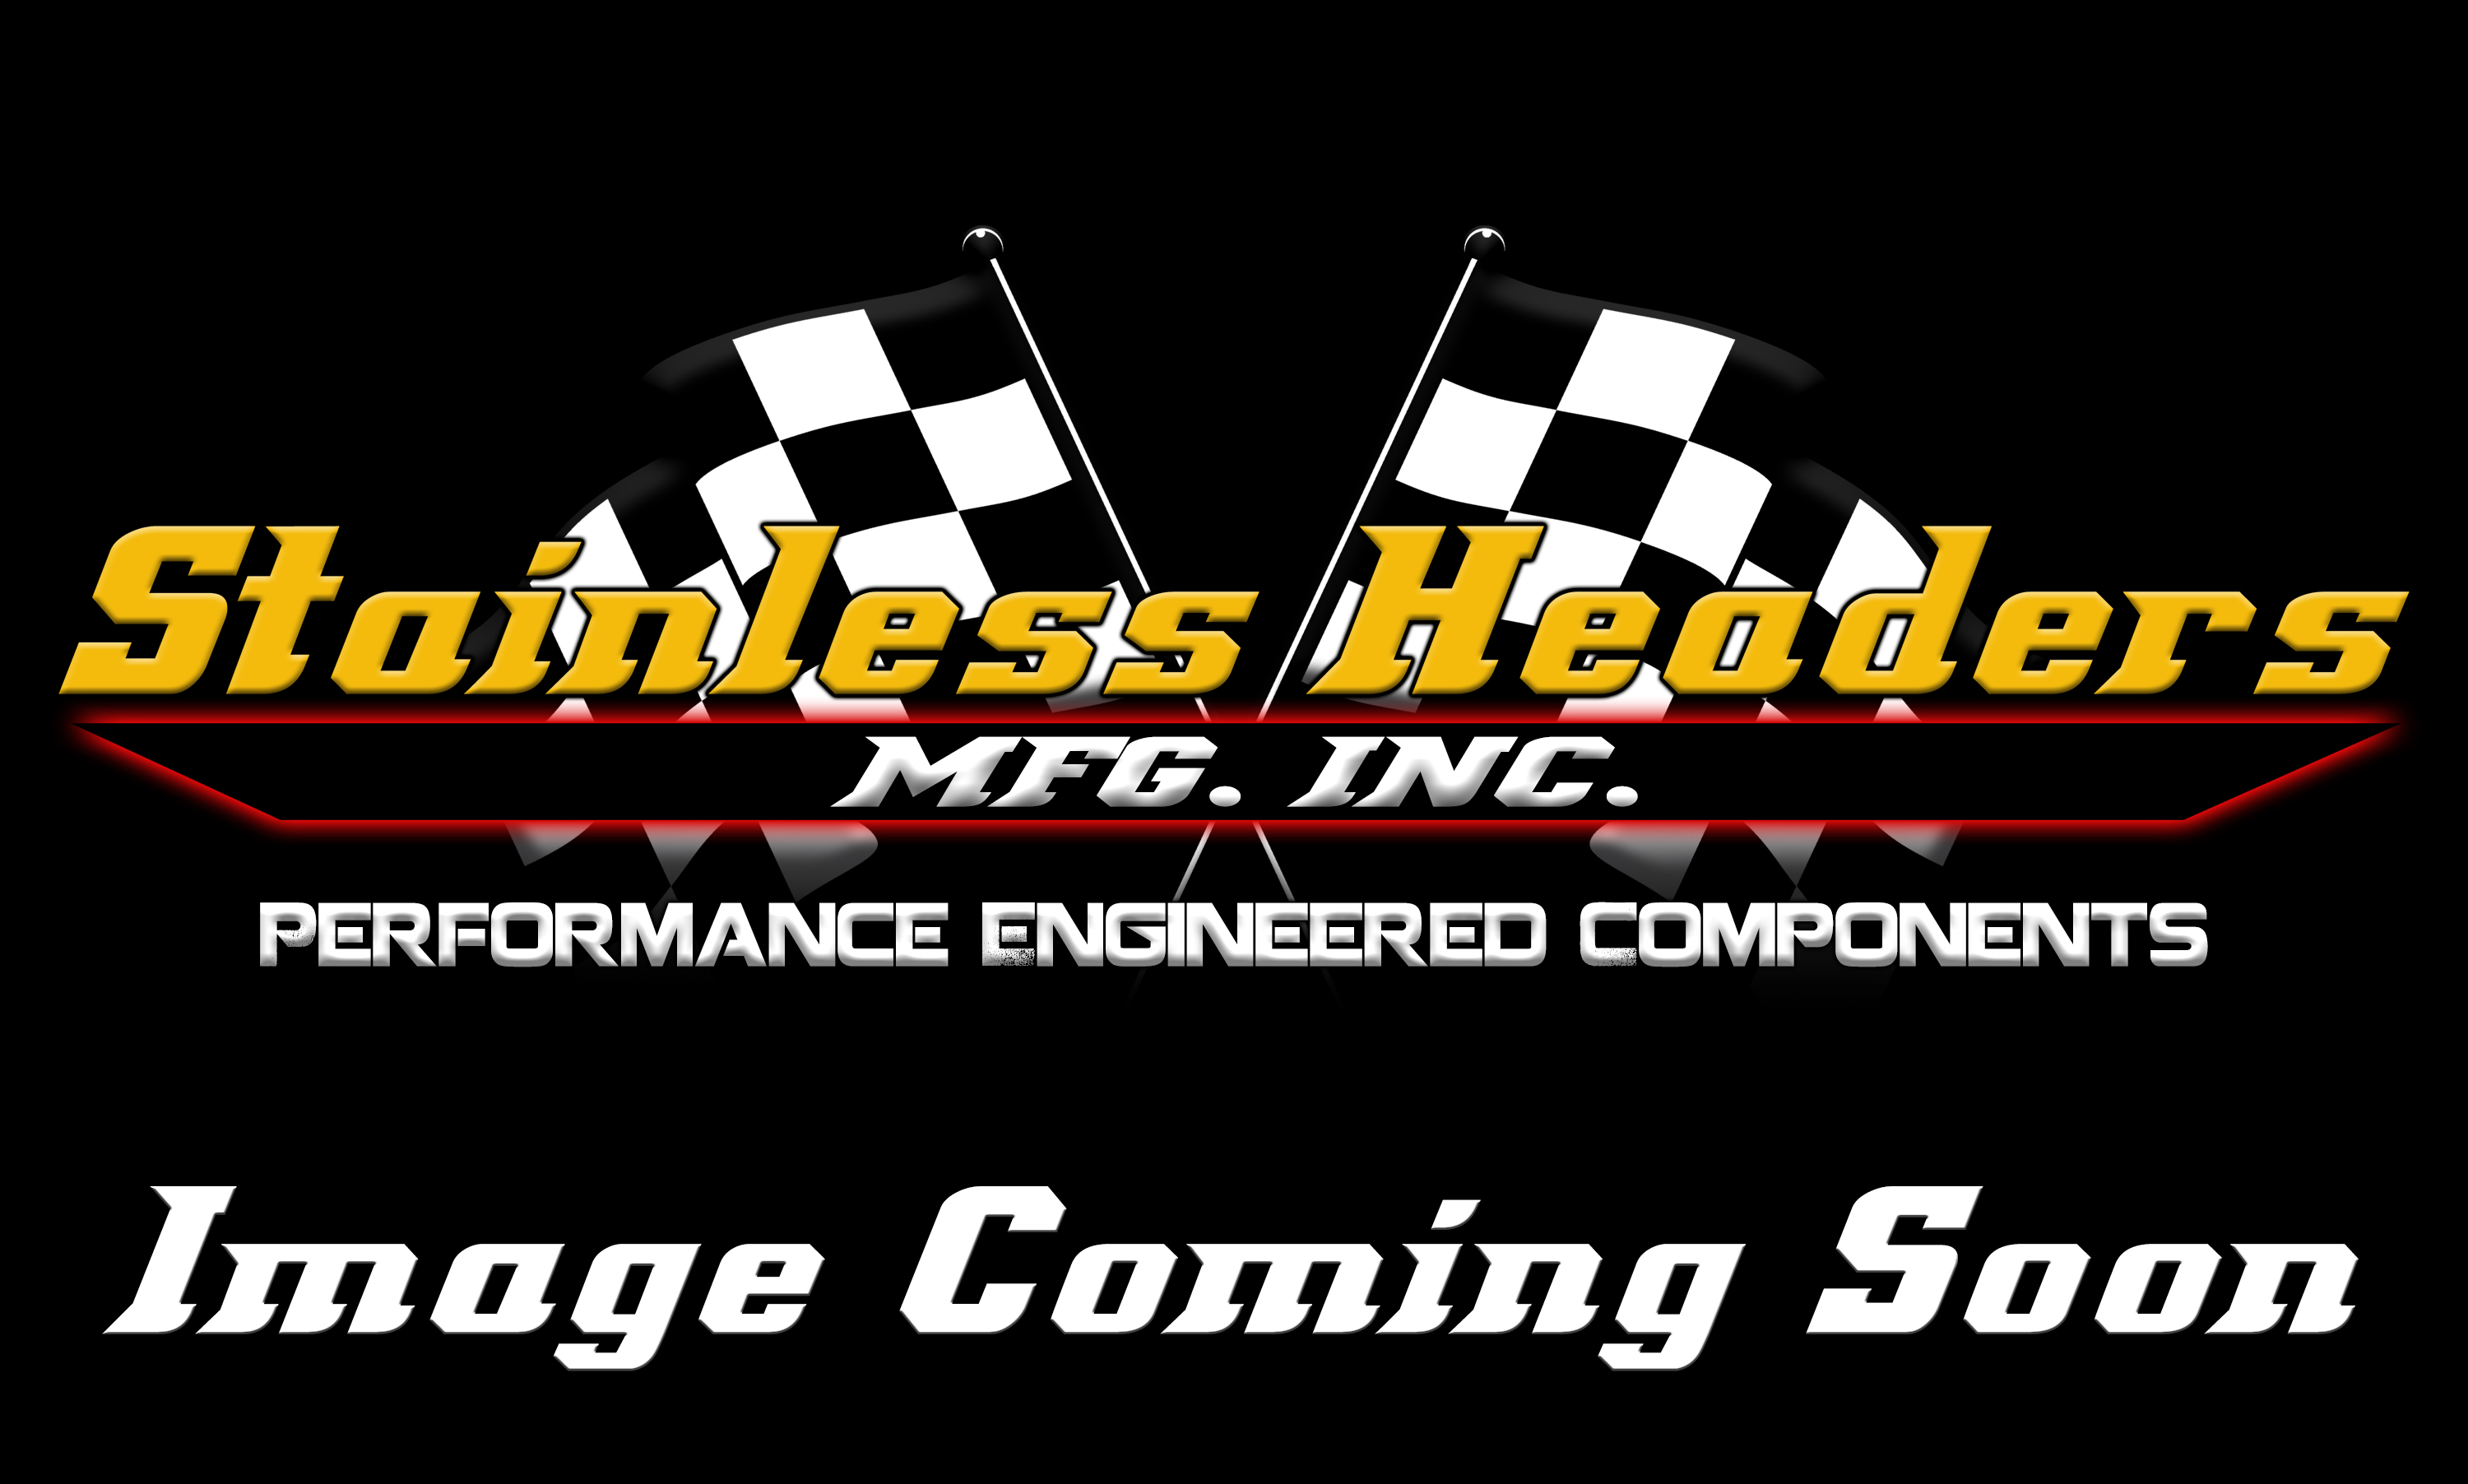 CompTurbo Technologies - CTR4202R-7290 Mid Frame Oil-Less 3.0 Turbocharger (1250 HP)